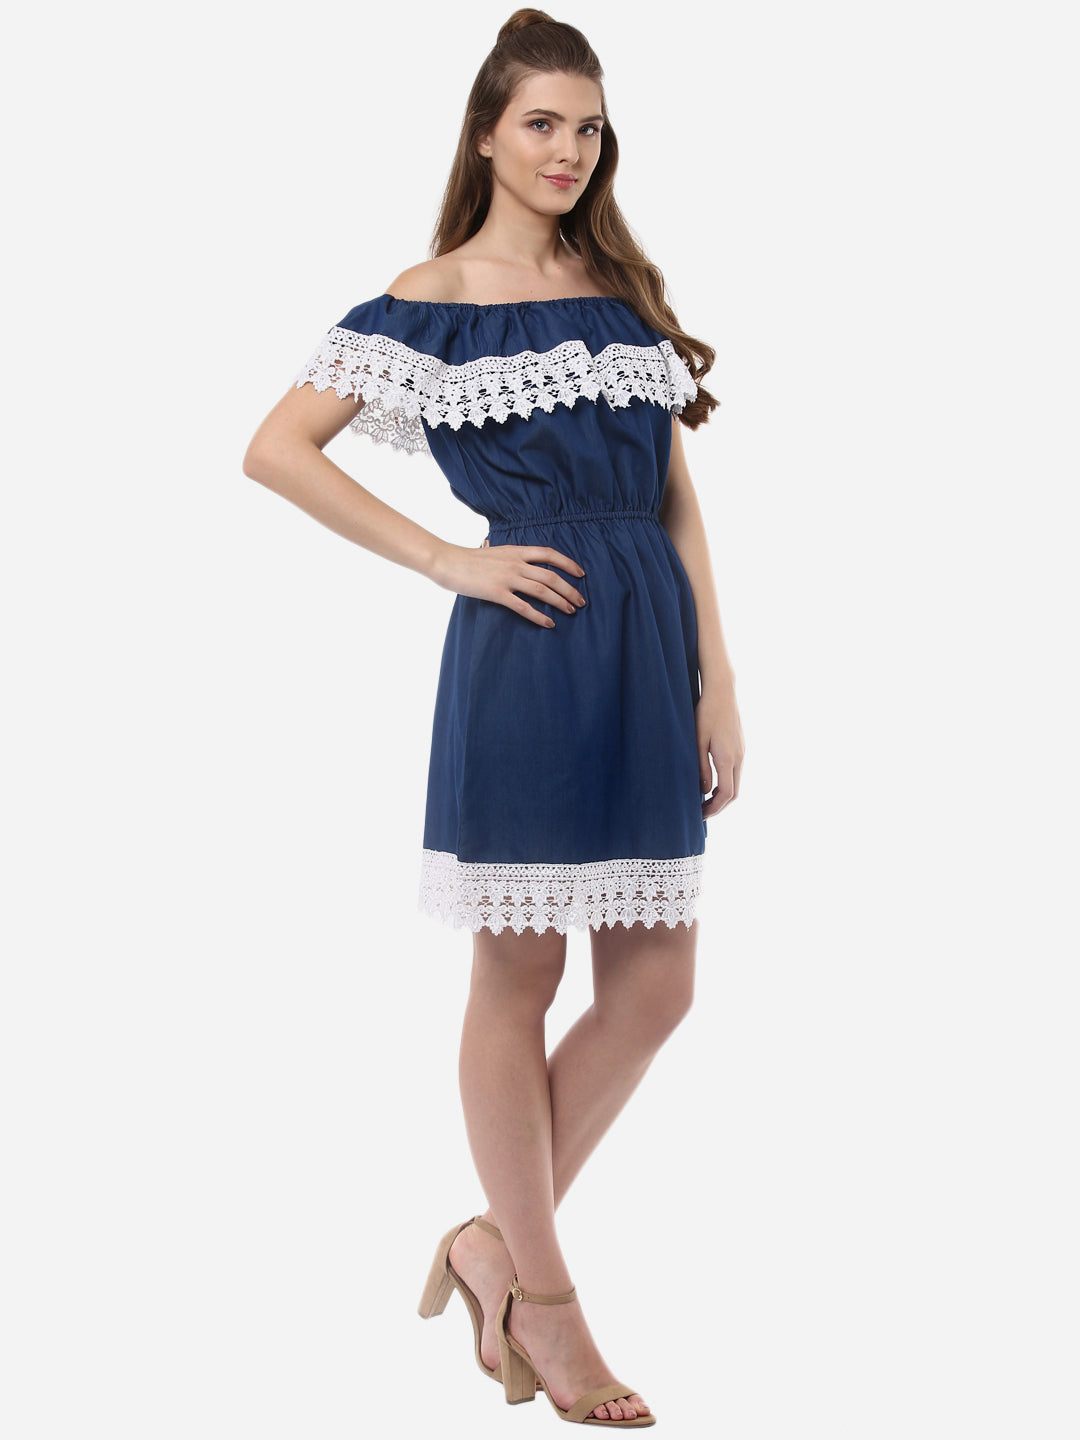 Women's OffShoulder Denim Dress with Lace Inserts